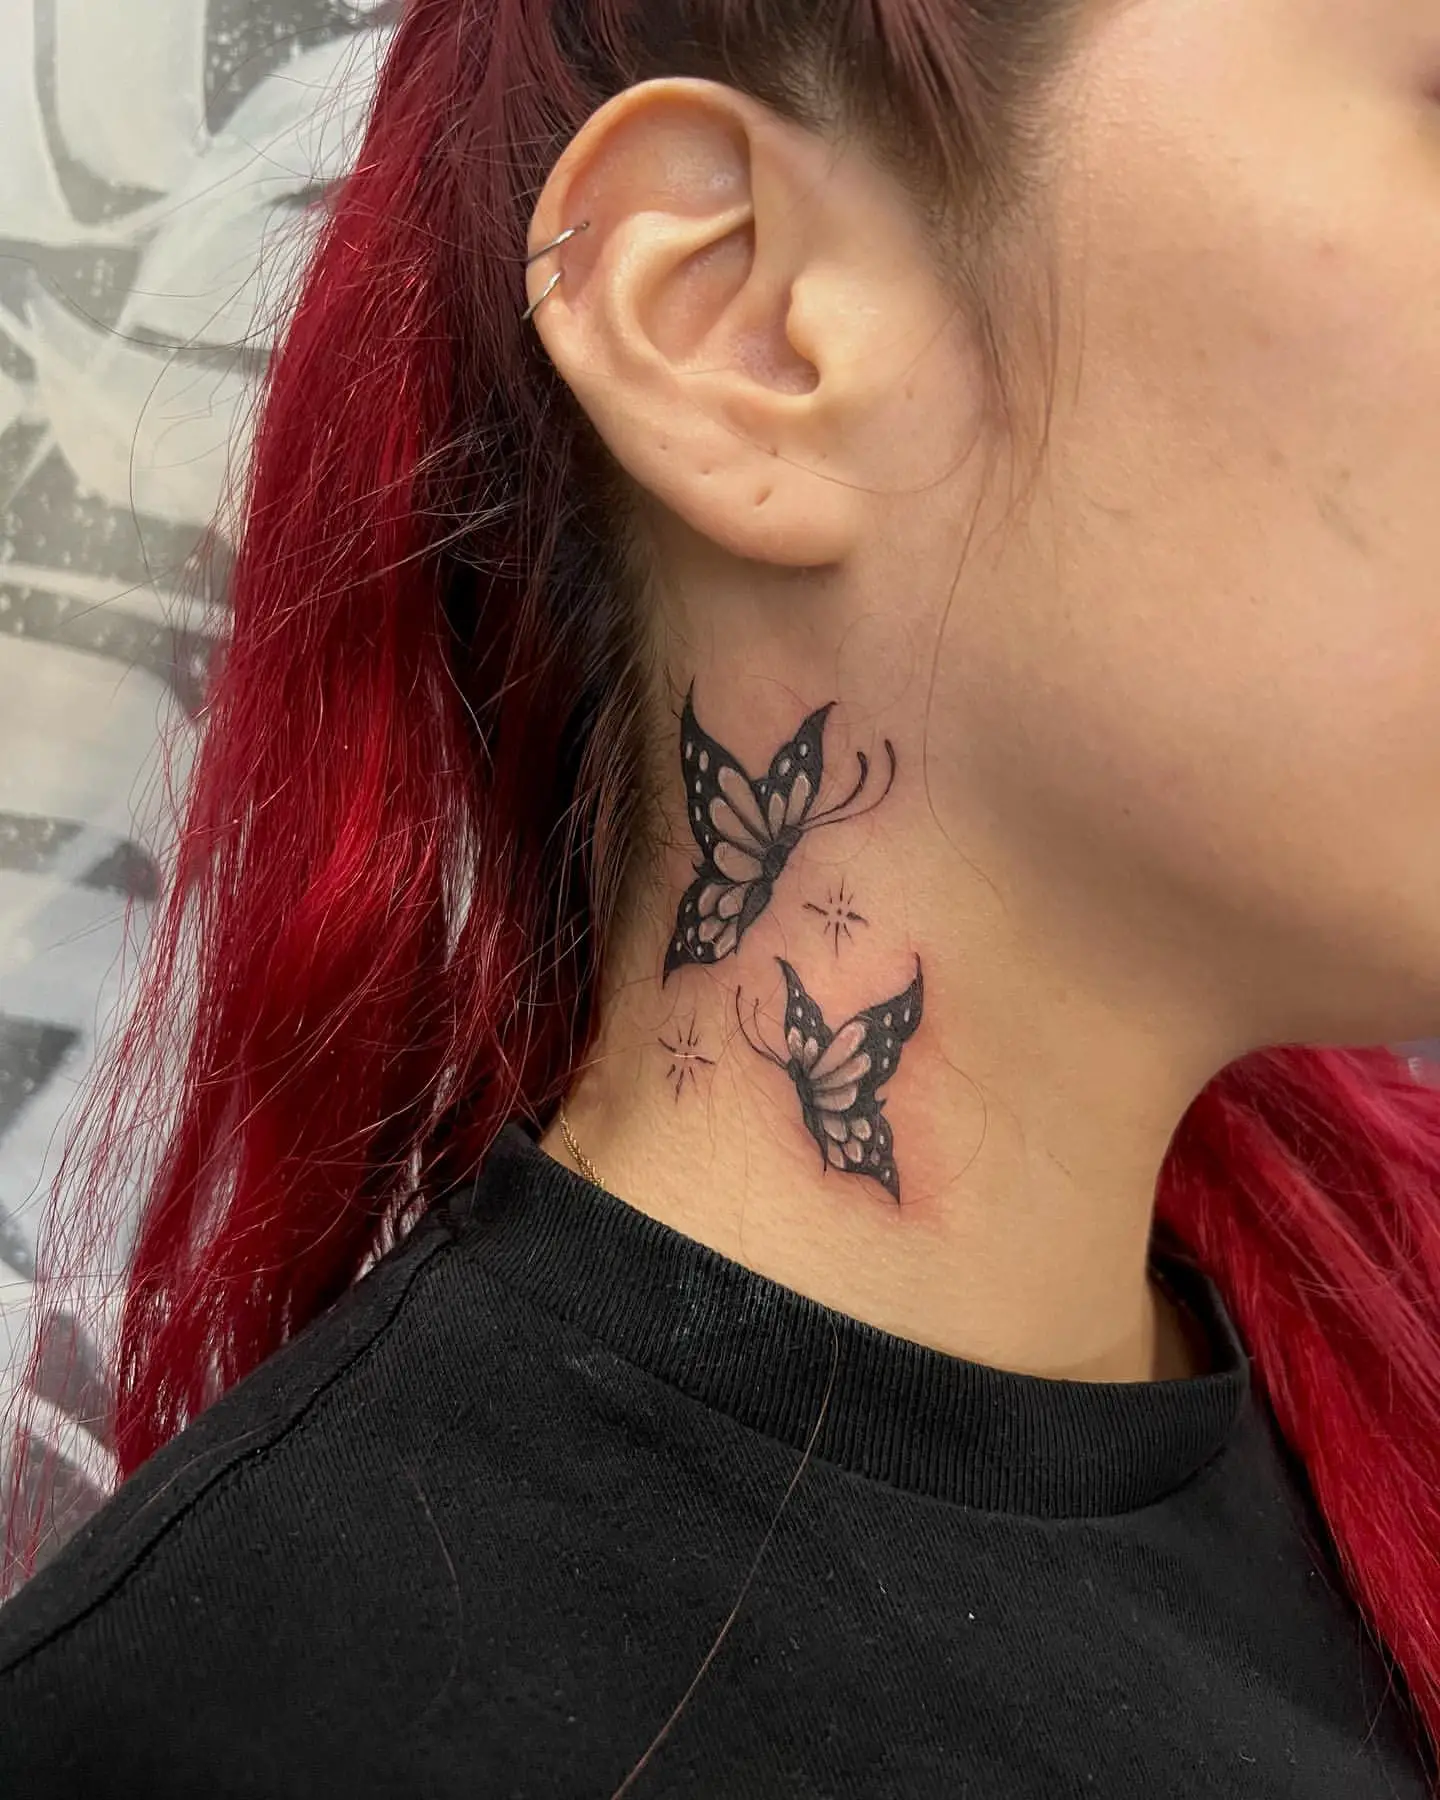 Minimal Butterfly Tattoos on Woman’s Neck